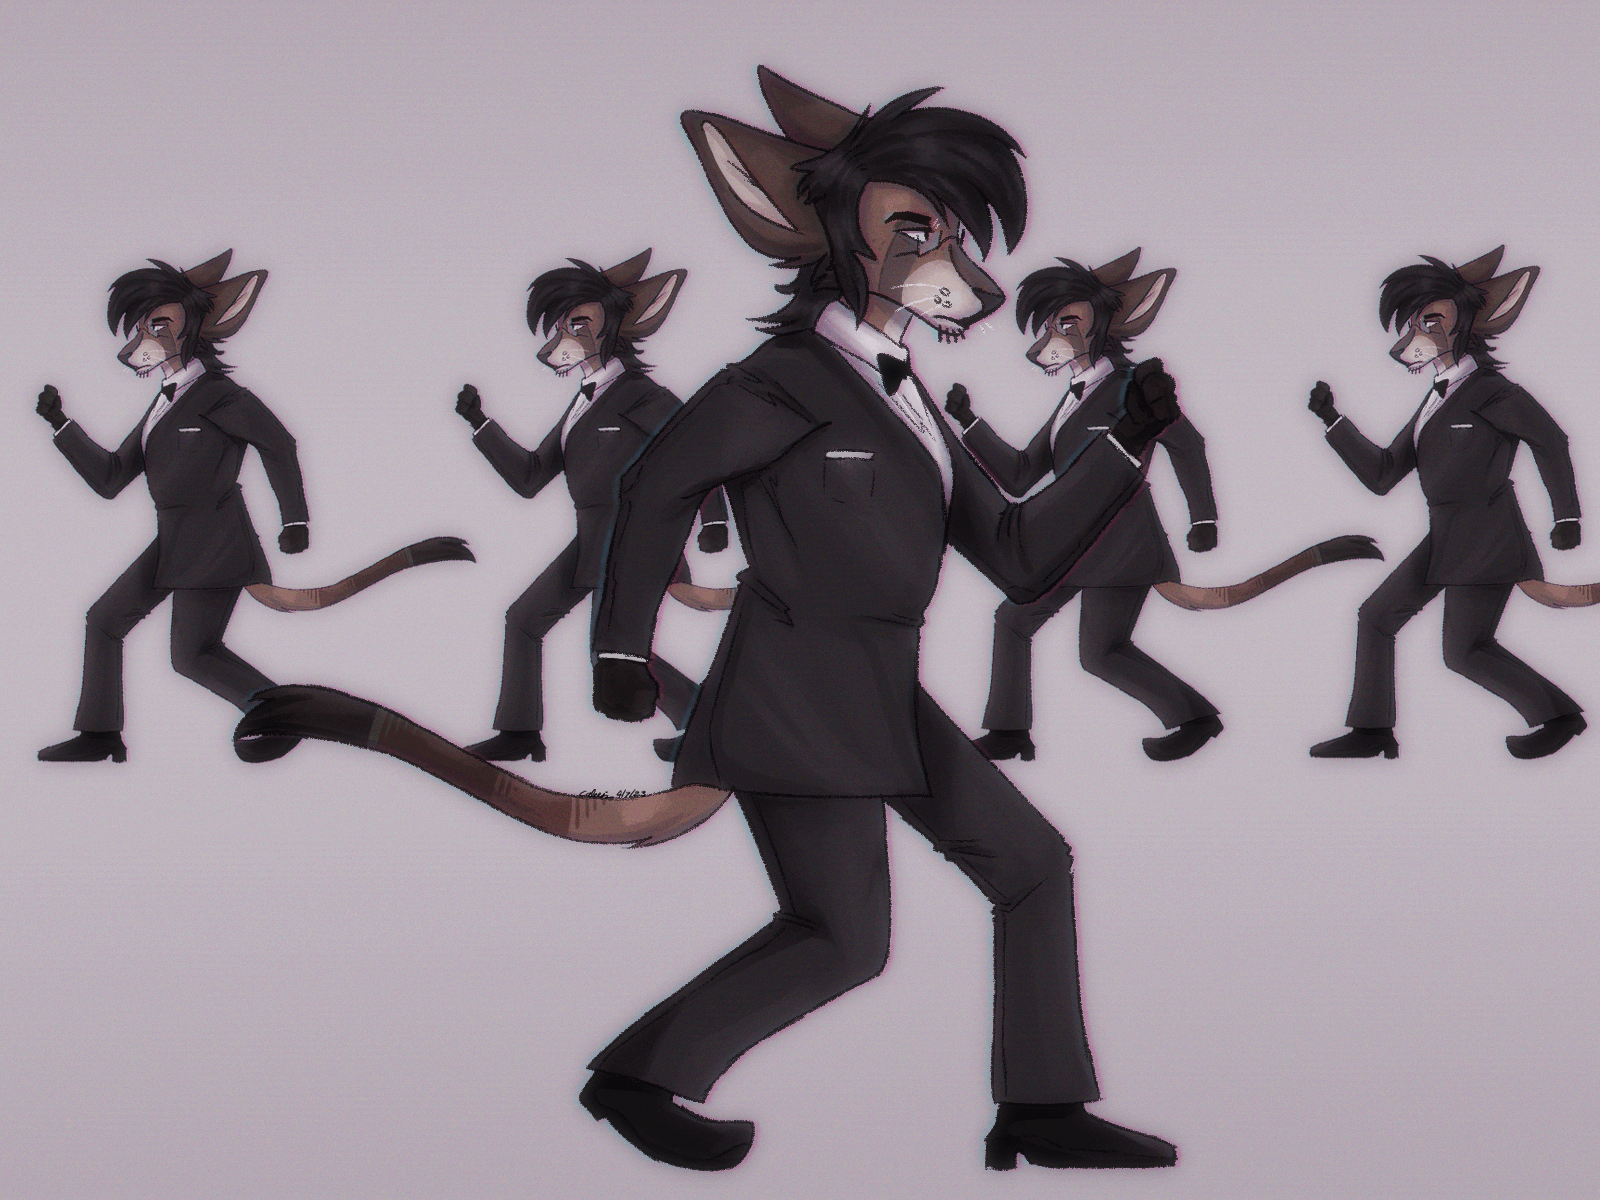 A drawing of an anthropomorphic brown and cream cat with long black hair wearing a black suit walking in one direction while 4 mirrored versions of himself walk in the opposite direction